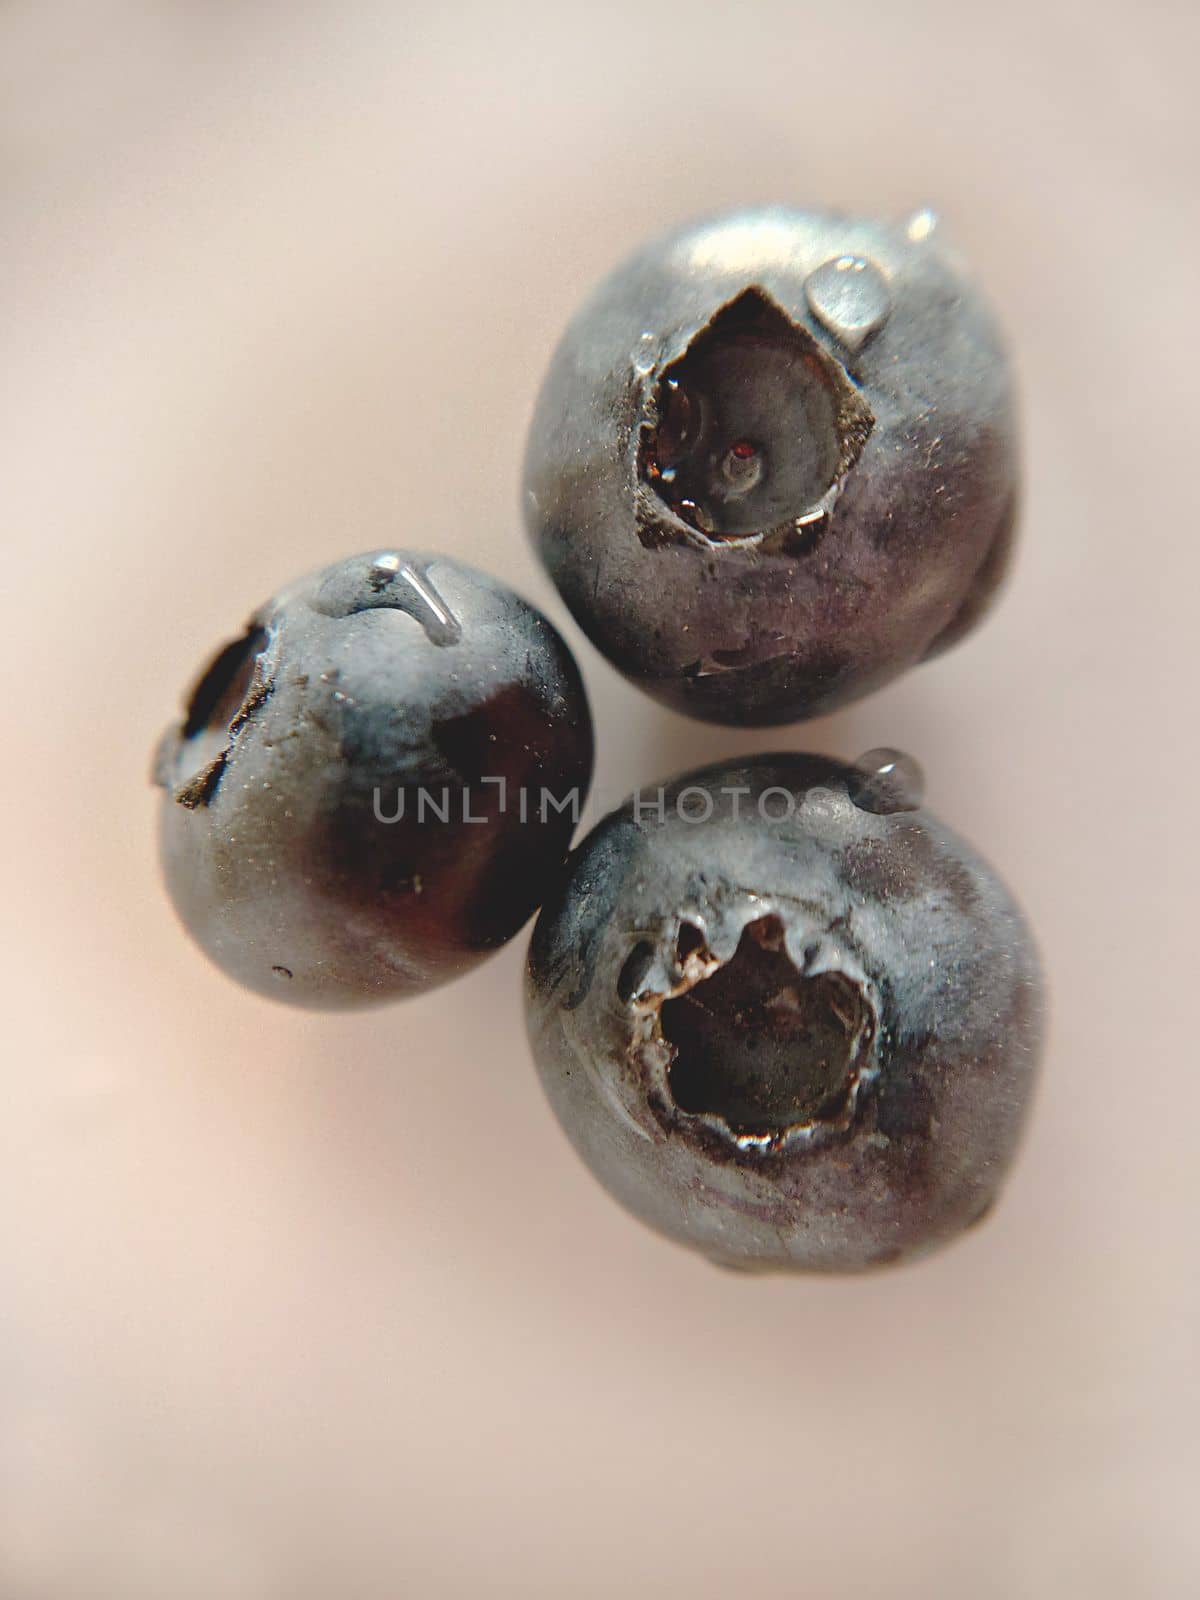 Three blueberry berries with water droplets close-up by Mastak80